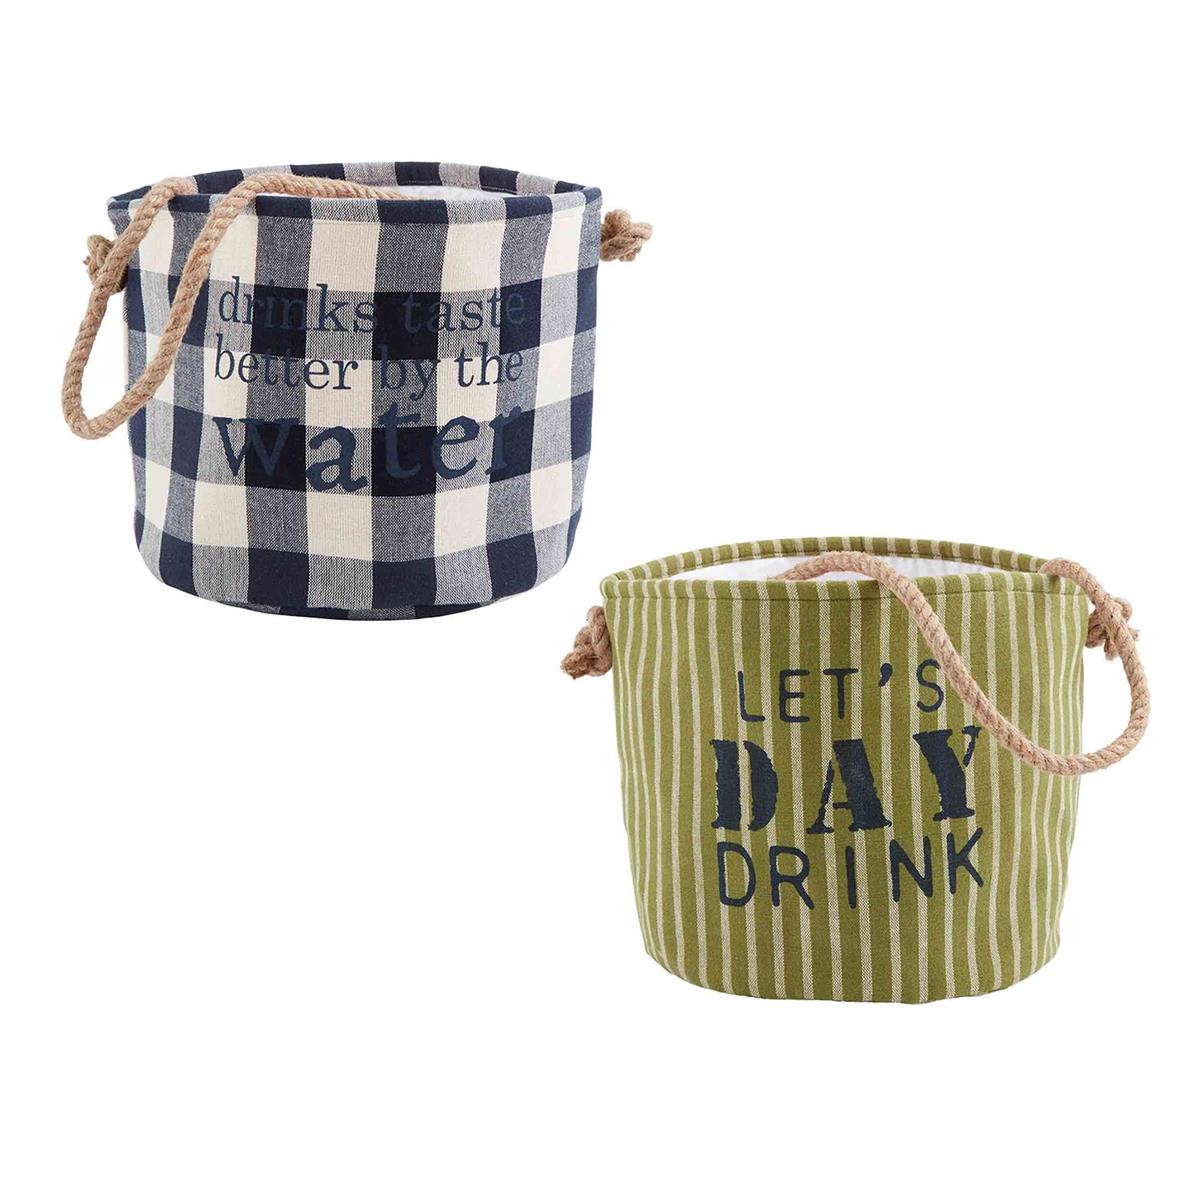 Lake Cooler Party Bag (2 Styles)